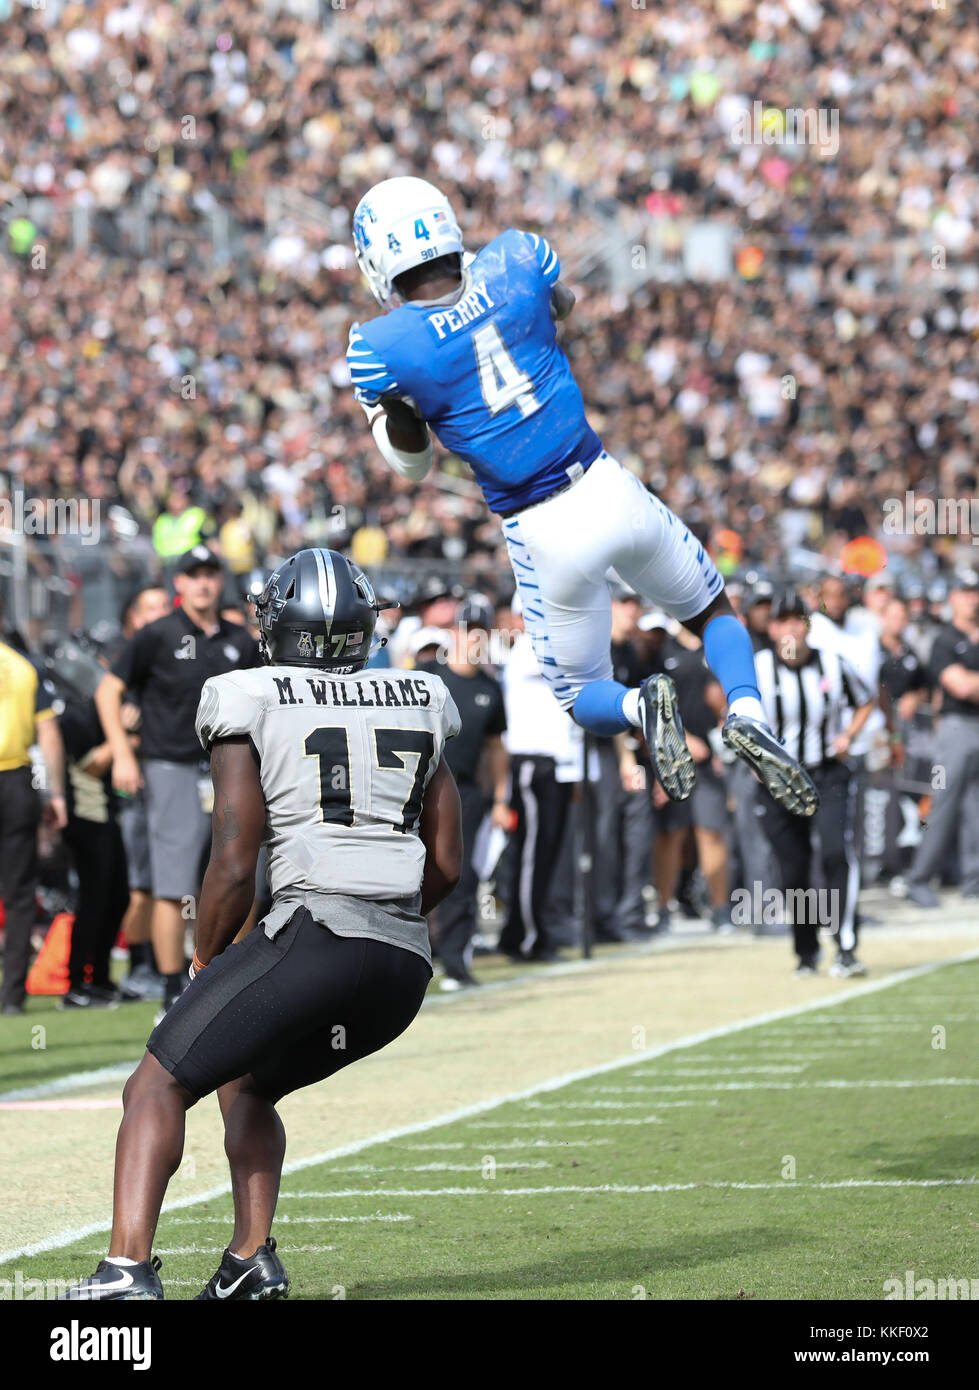 Orlando, FL, USA. 2nd Dec, 2017. Memphis' Josh Perry #4 jumps high in the air to try and intercept a pass but landed out of bounds during the AAC Championship football game between the UCF Knights and the Memphis Tigers at the Spectrum Stadium in Orlando, FL. Kyle Okita/CSM/Alamy Live News Stock Photo